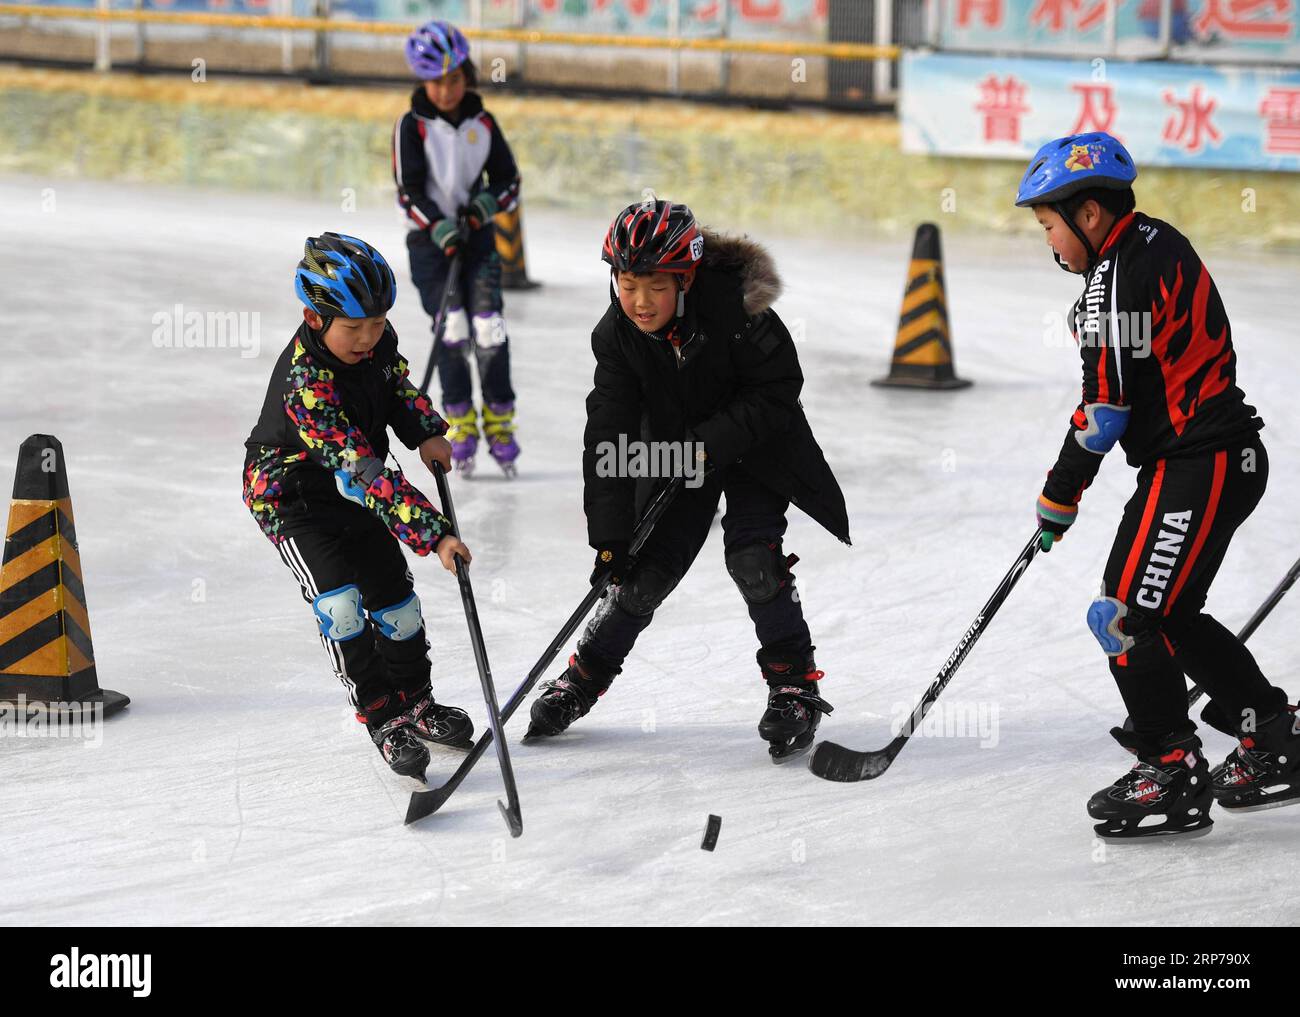 (190201) -- BEIJING, Feb. 1, 2019 (Xinhua) -- Photo taken on Jan. 9, 2019 shows students playing ice hockey during a skating training session at Taipingzhuang Central Primary School, in Yanqing District of Beijing, capital of China. Taipingzhuang Central Primary School situated right at the foot of Xiaohaituo Mountains, where the venues for Beijing 2022 Winter Olympic games are under construction. Teachers of Taipingzhuang Central Primary School have turned an experimental farmland into a seasonal skating rink for the pupils here to learn skating since 2016. The school hired a experienced coac Stock Photo